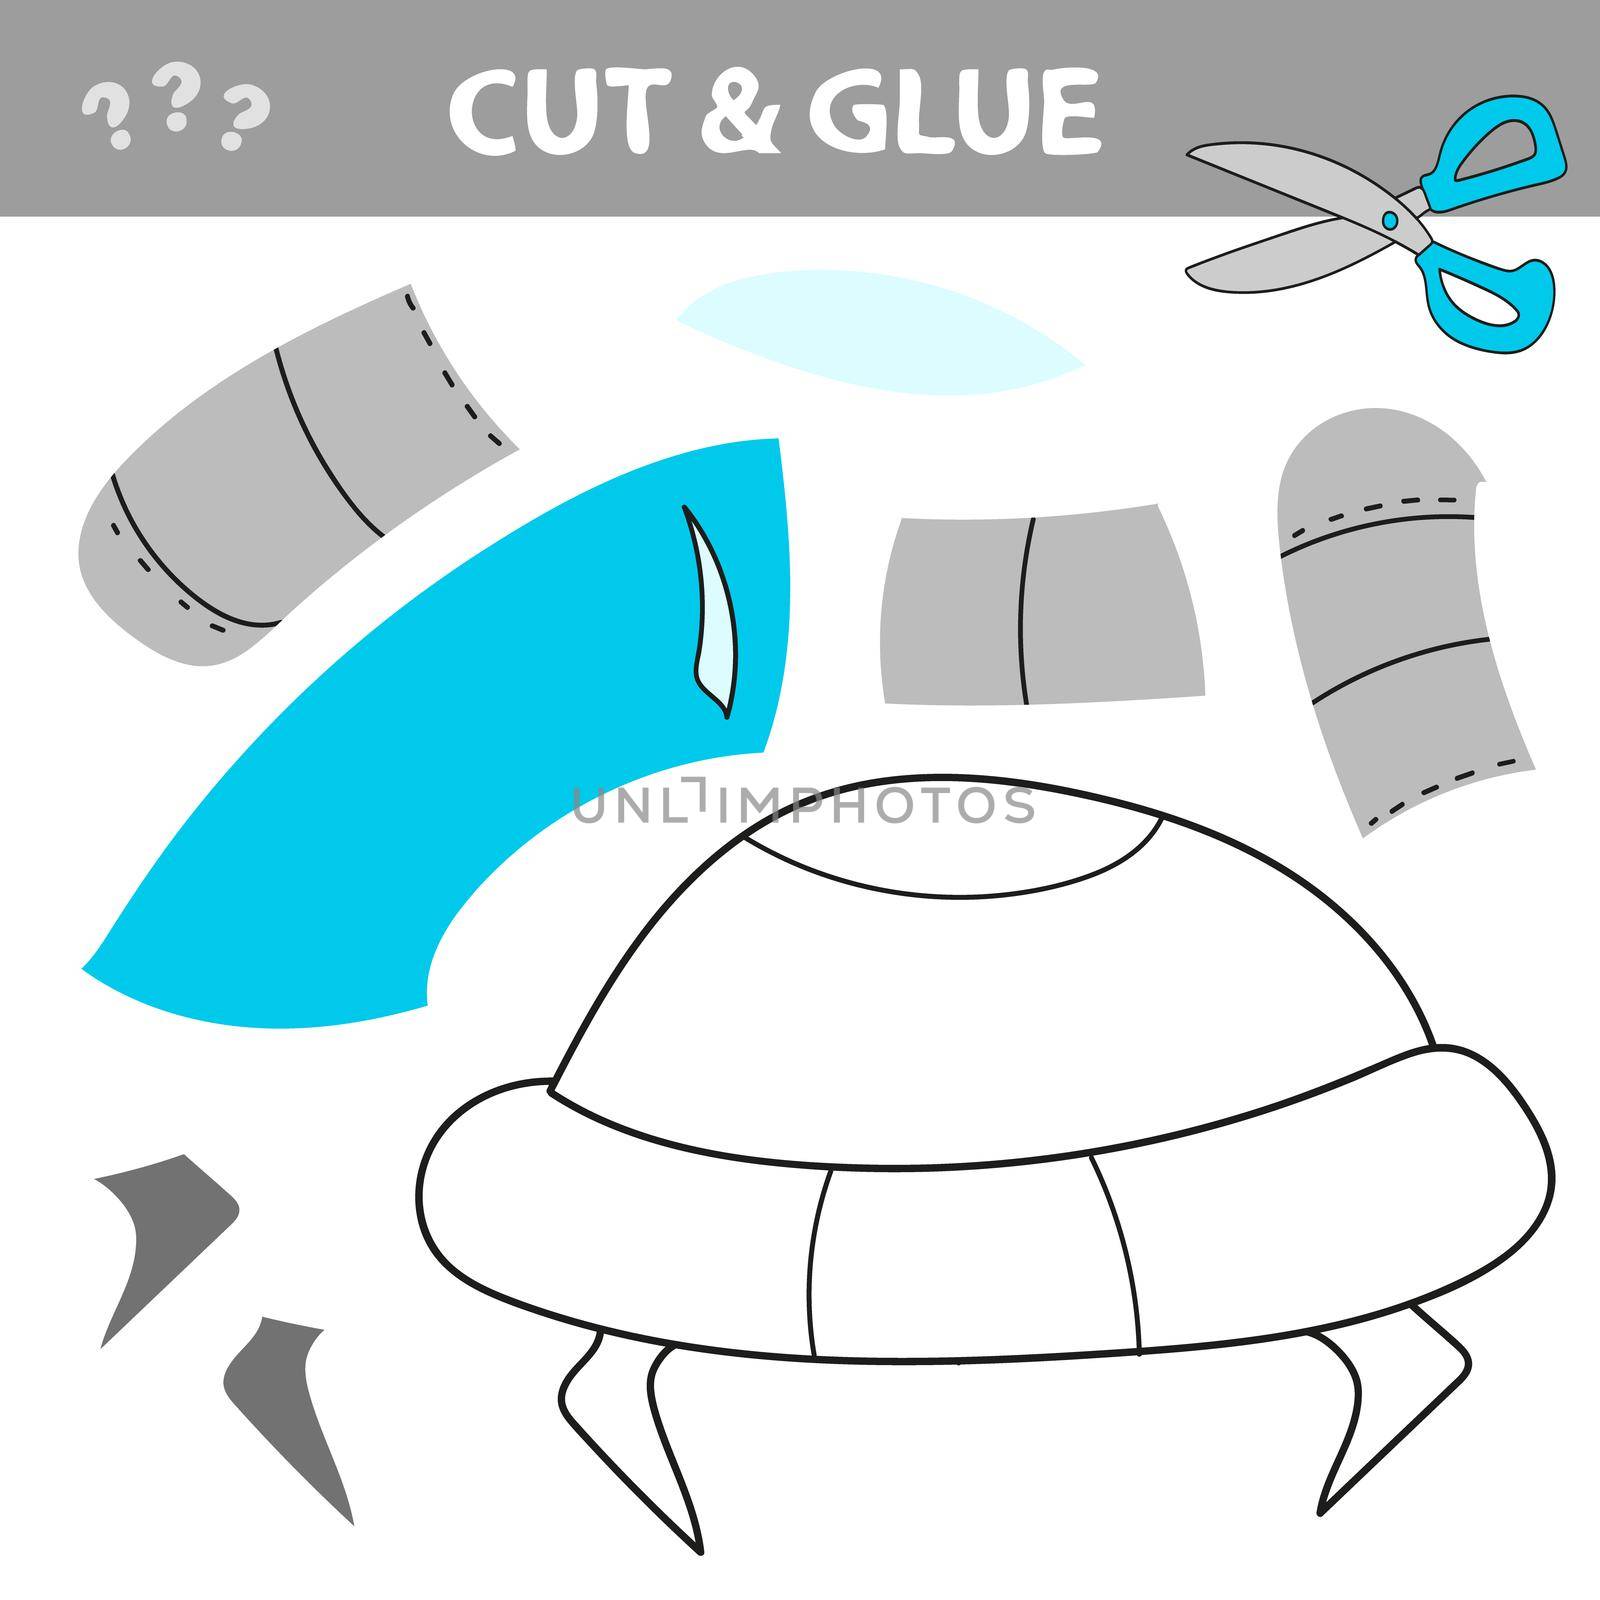 Cut and glue - Simple game for kids. Simple kid application with UFO by natali_brill